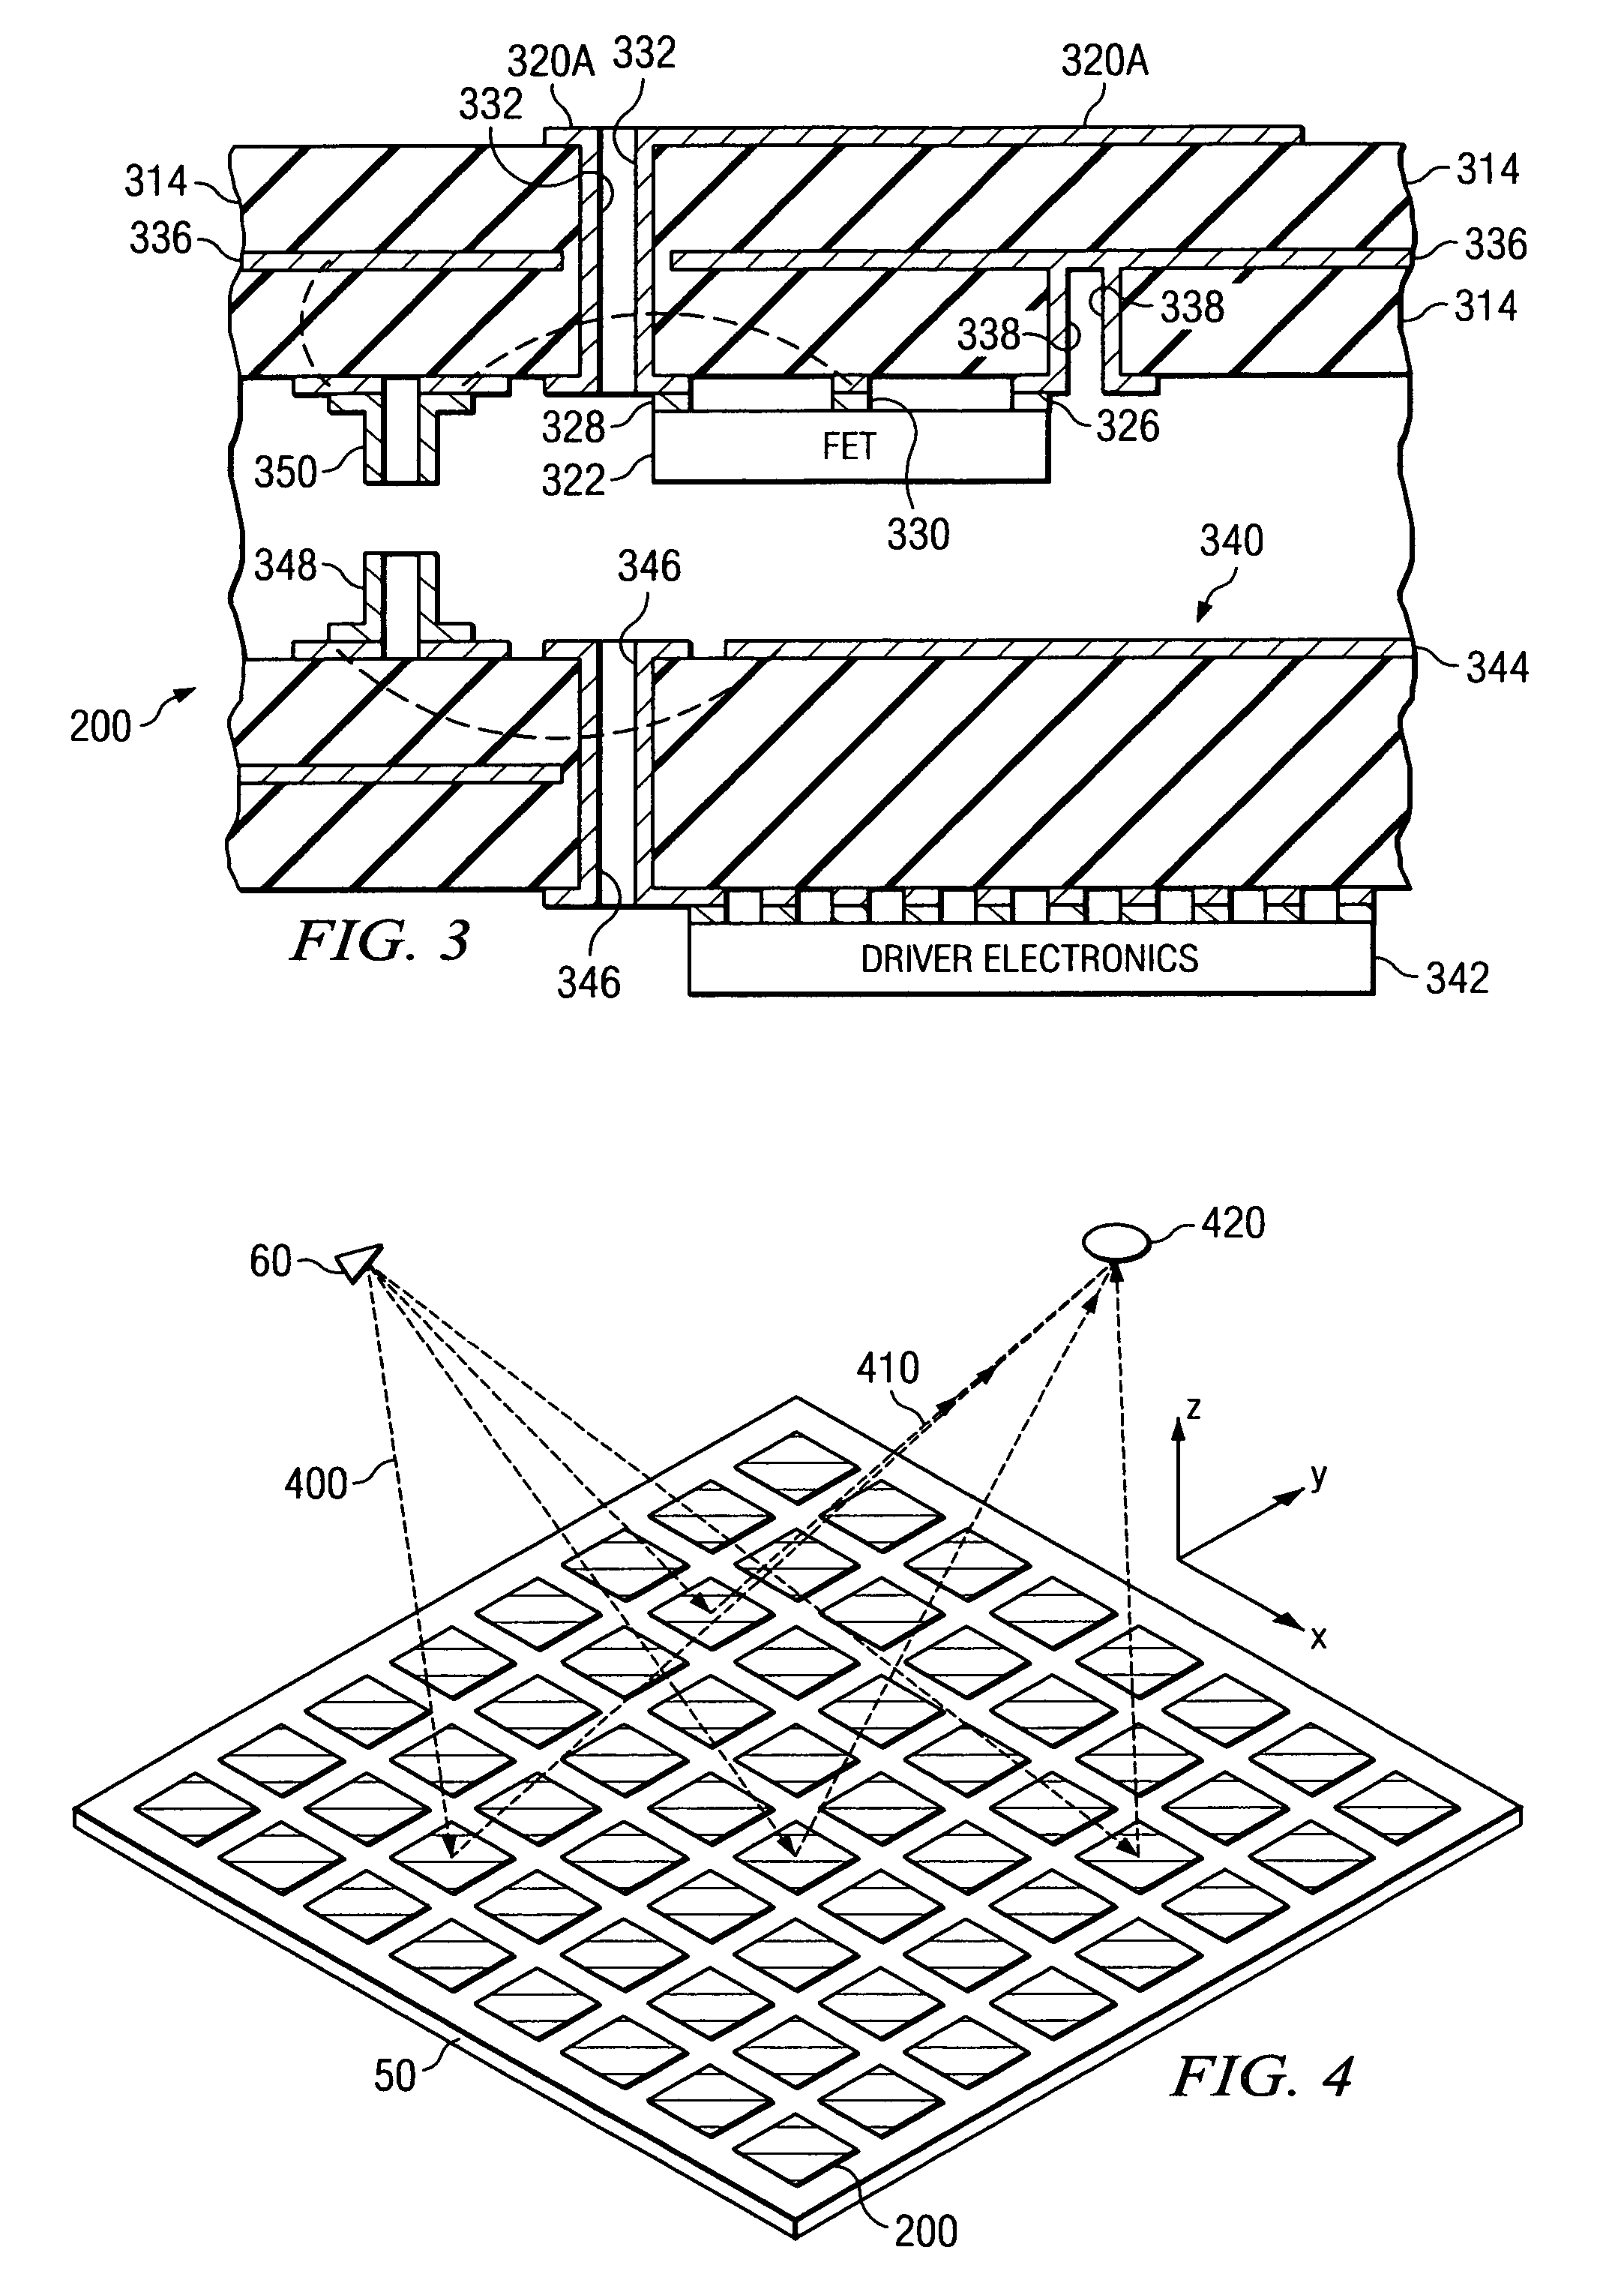 System and method for microwave imaging using programmable transmission array